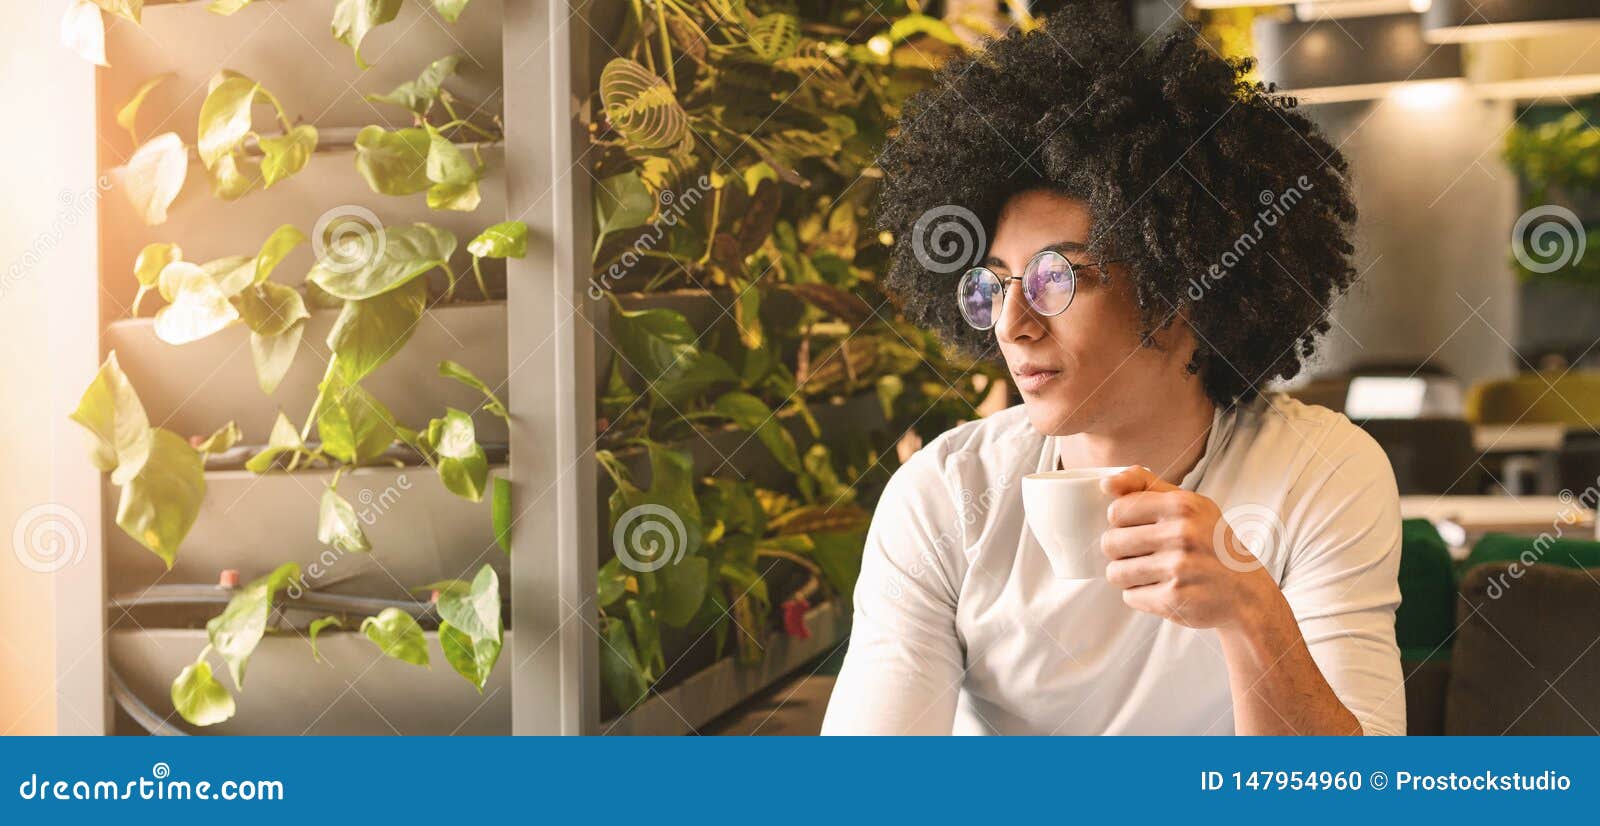 Dreamy Black Millennial Guy Drinking Coffee In Cafeteria Stock Photo Image Of Morning Cafe 147954960